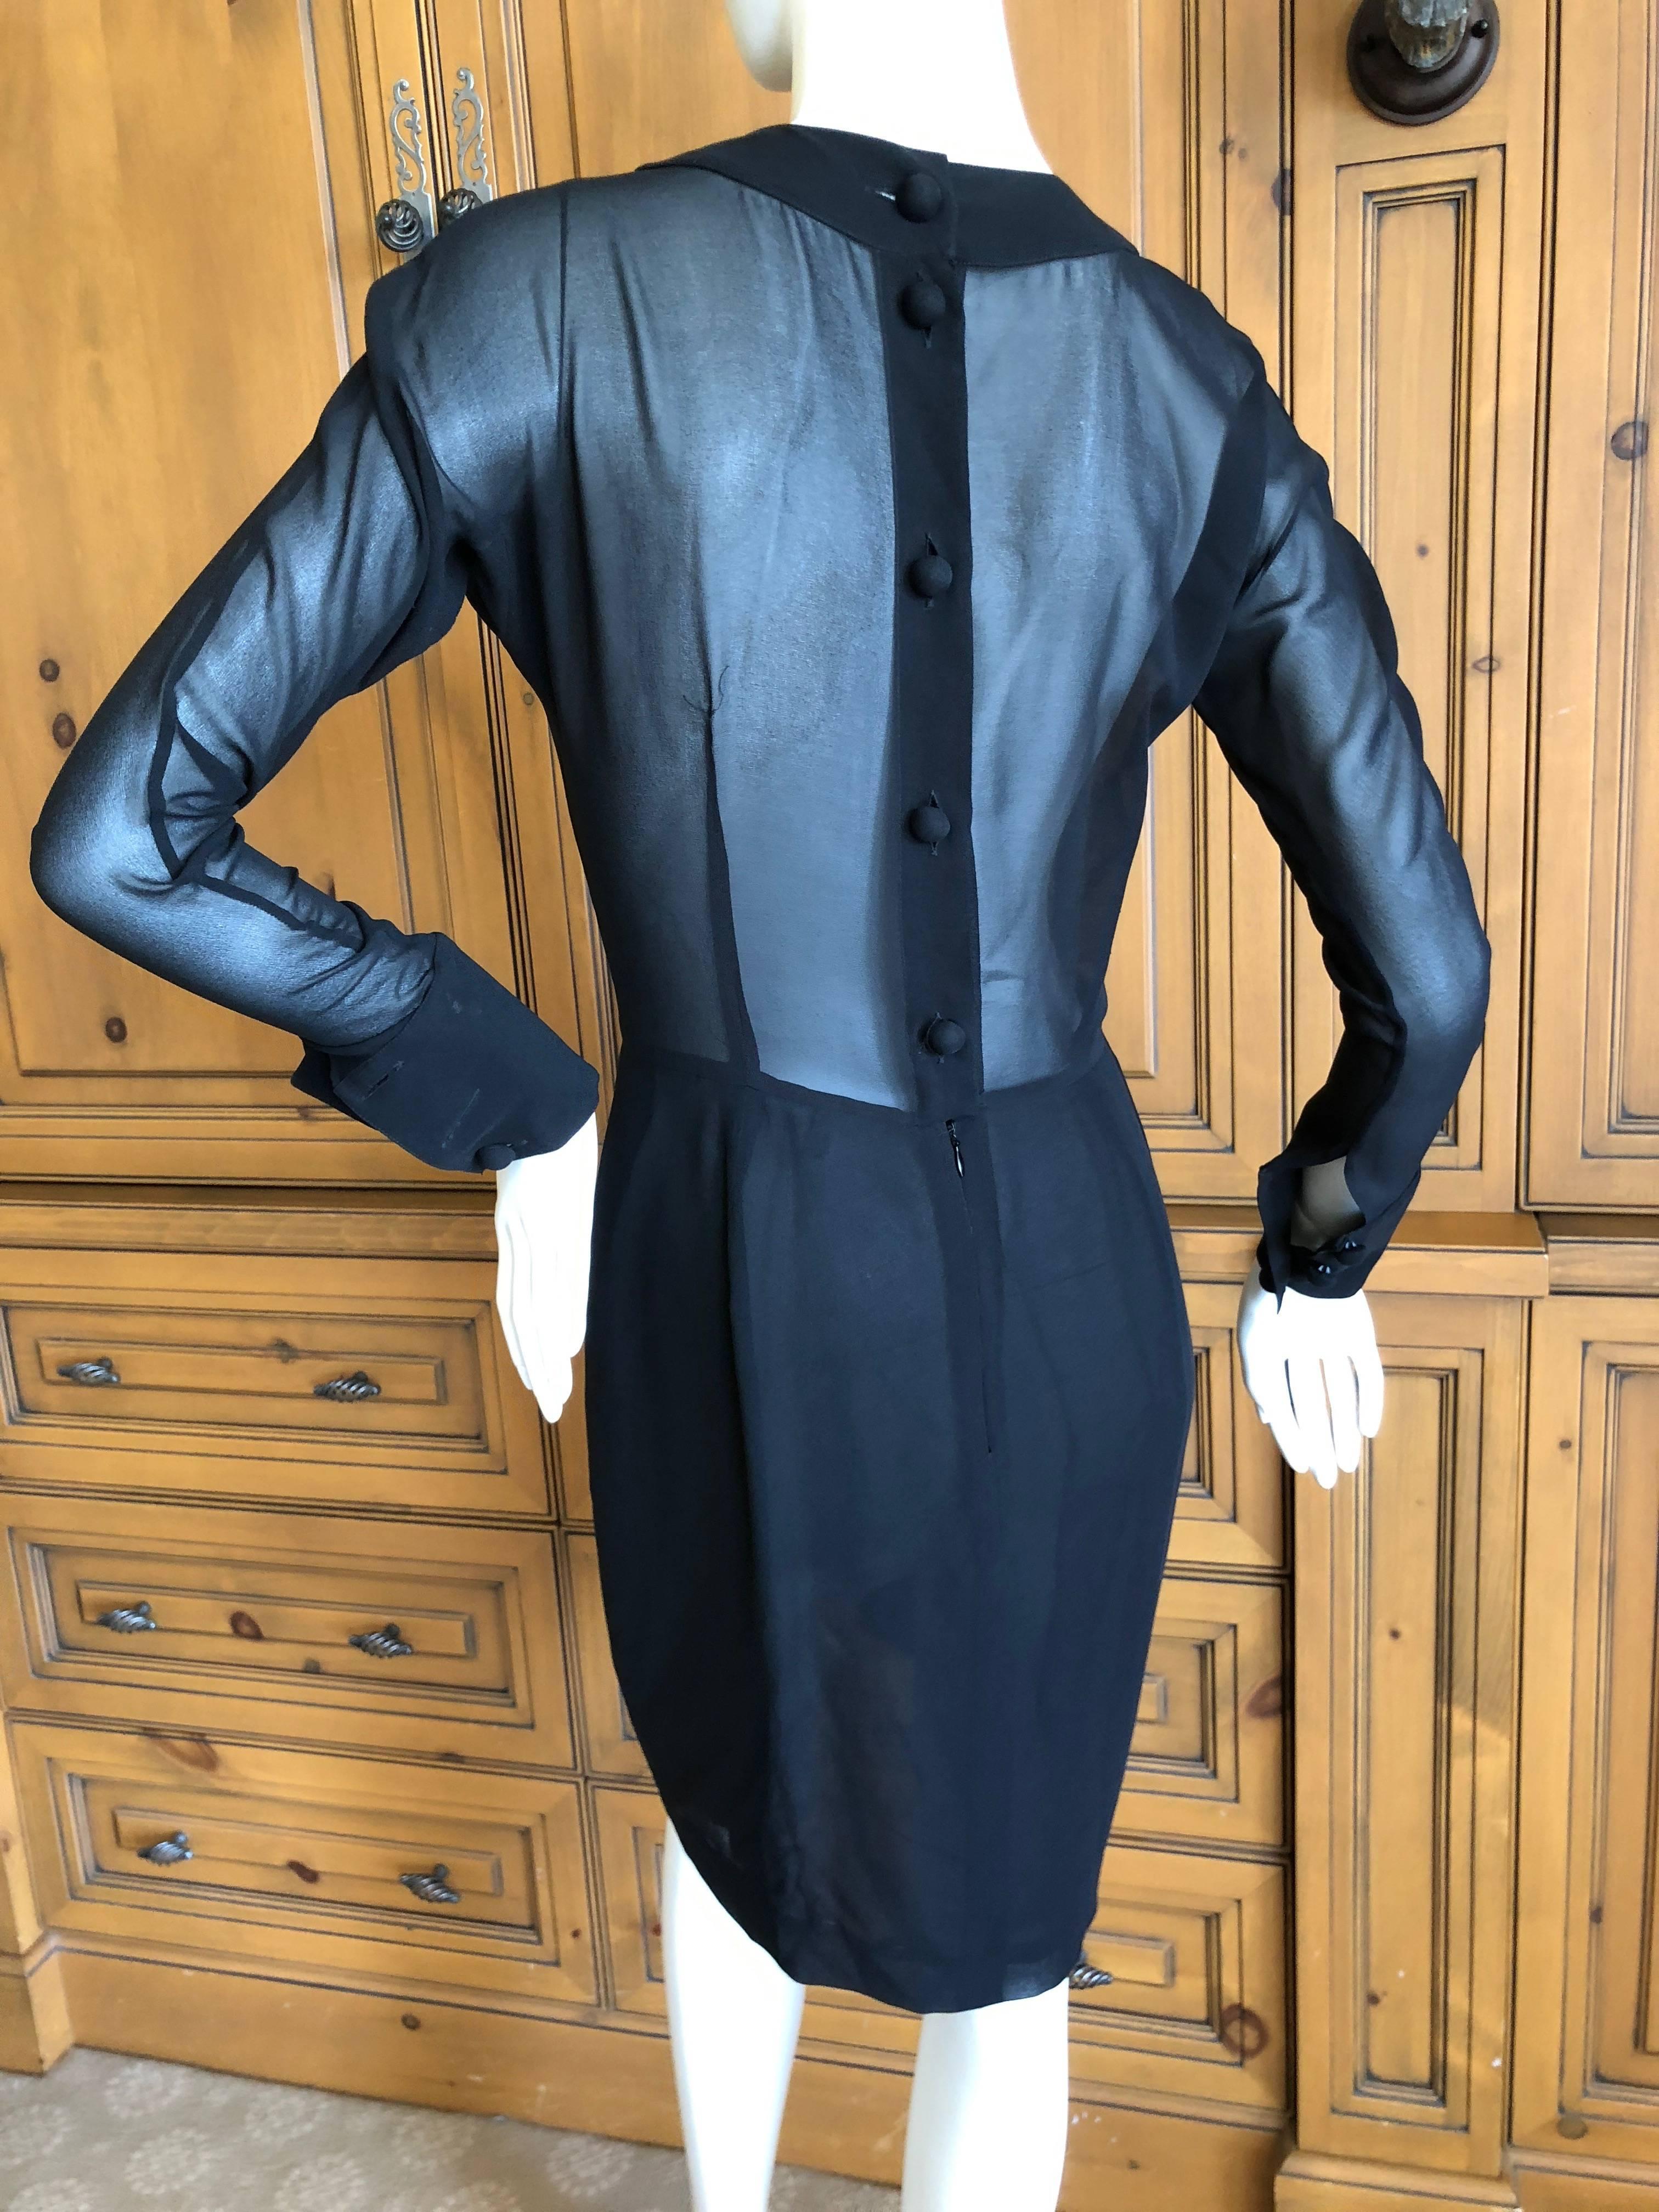 Christian Lacroix Vintage Sheer Black Silk Cocktail Dress with Matching Cape For Sale 6